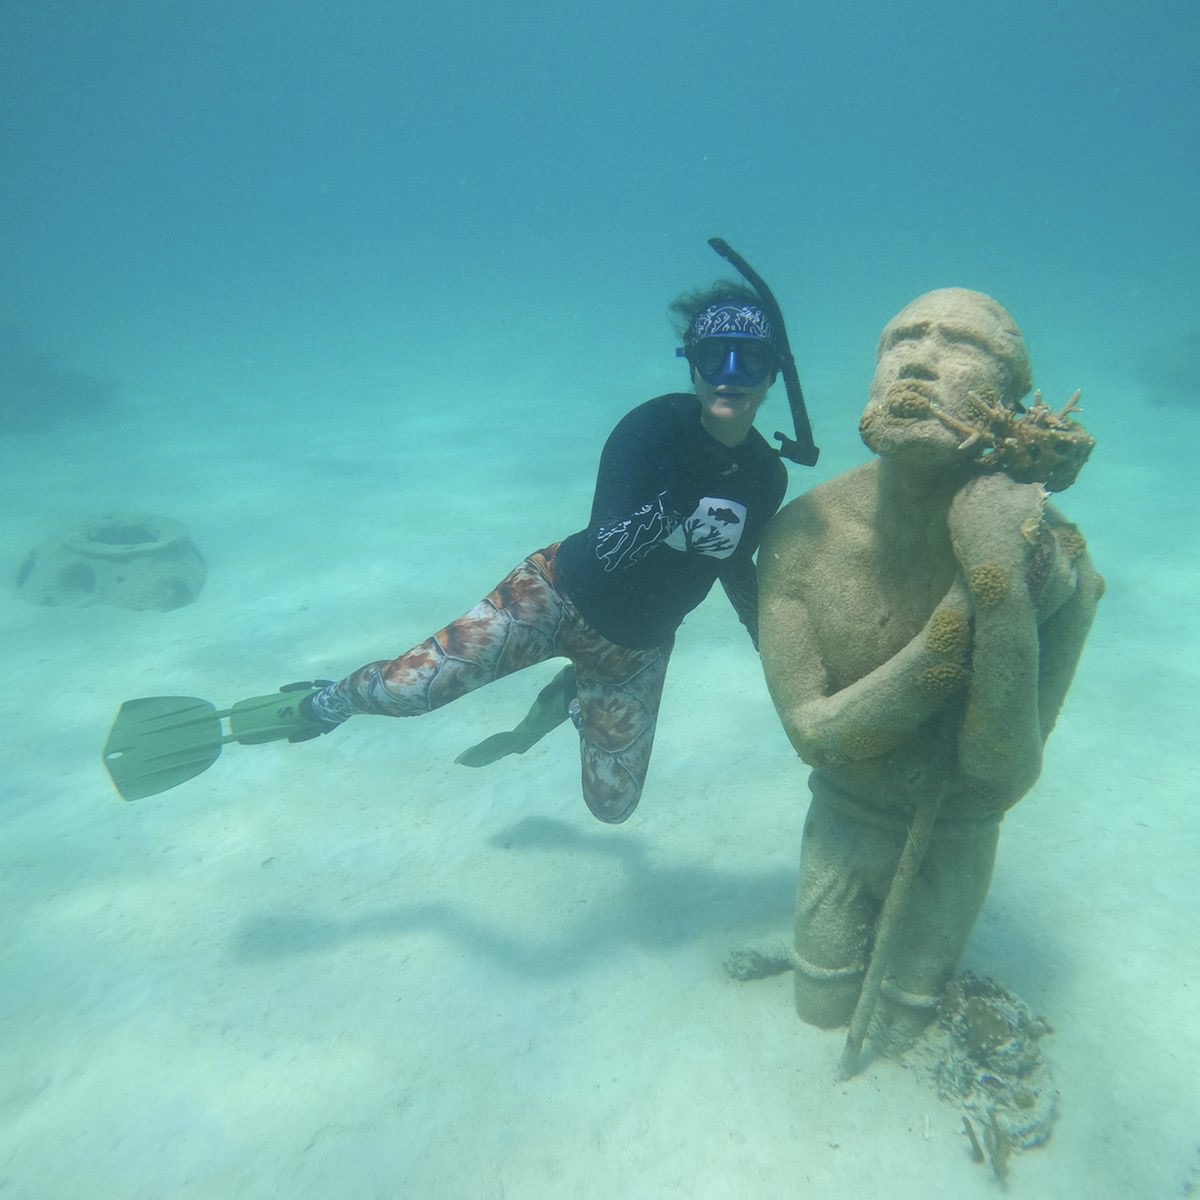 The sculpture garden in New Providence (Nassau) is a very popular site for snorkeling and is a good place to go, pose and get great shots like this one. PC: Sara Morales